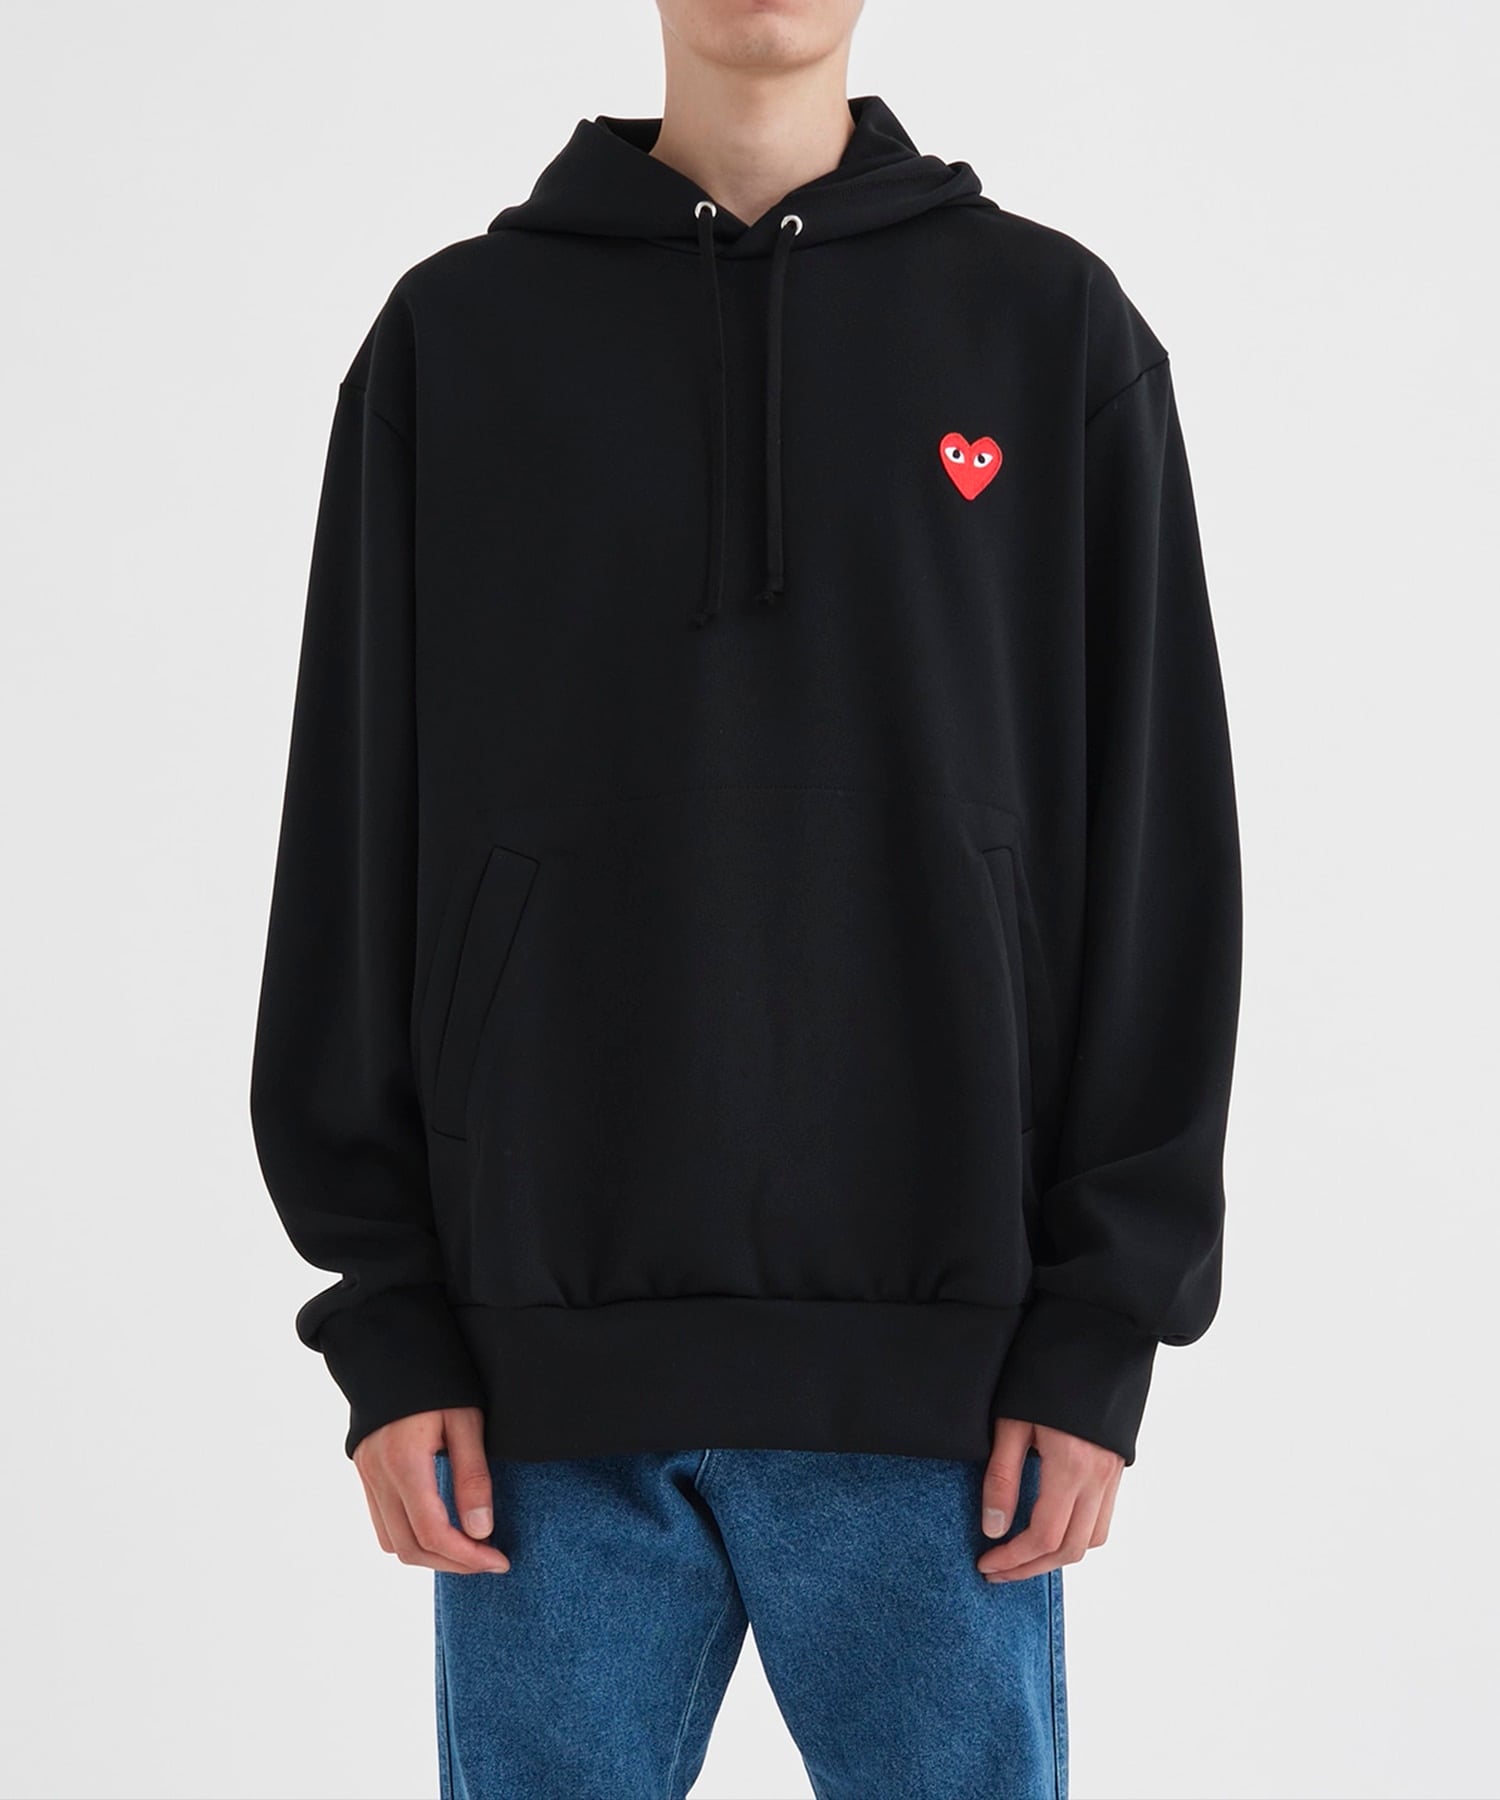 AZ-T174-051 PLAY HOODED SWEATSHIRT RED HEART PLAY COMME des GARCONS